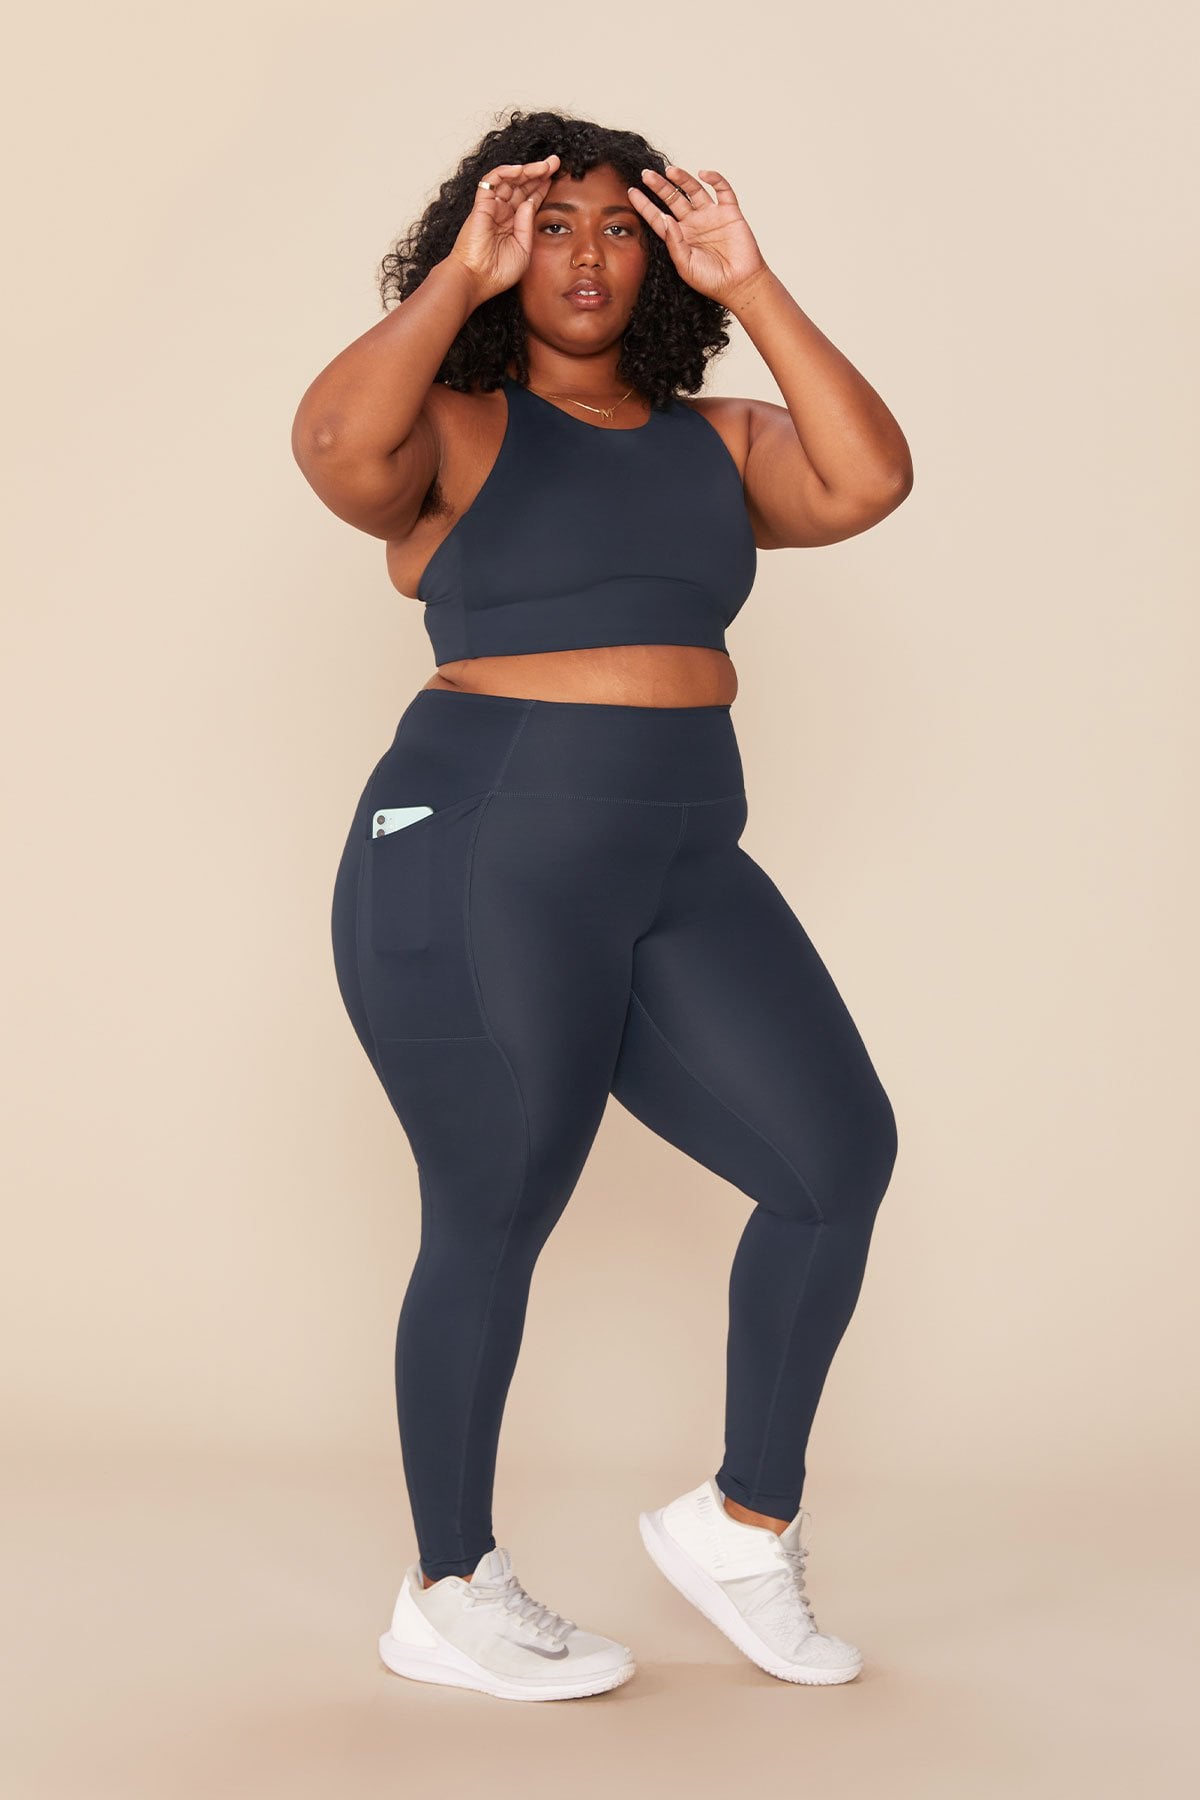 Most Breathable Workout Leggings 